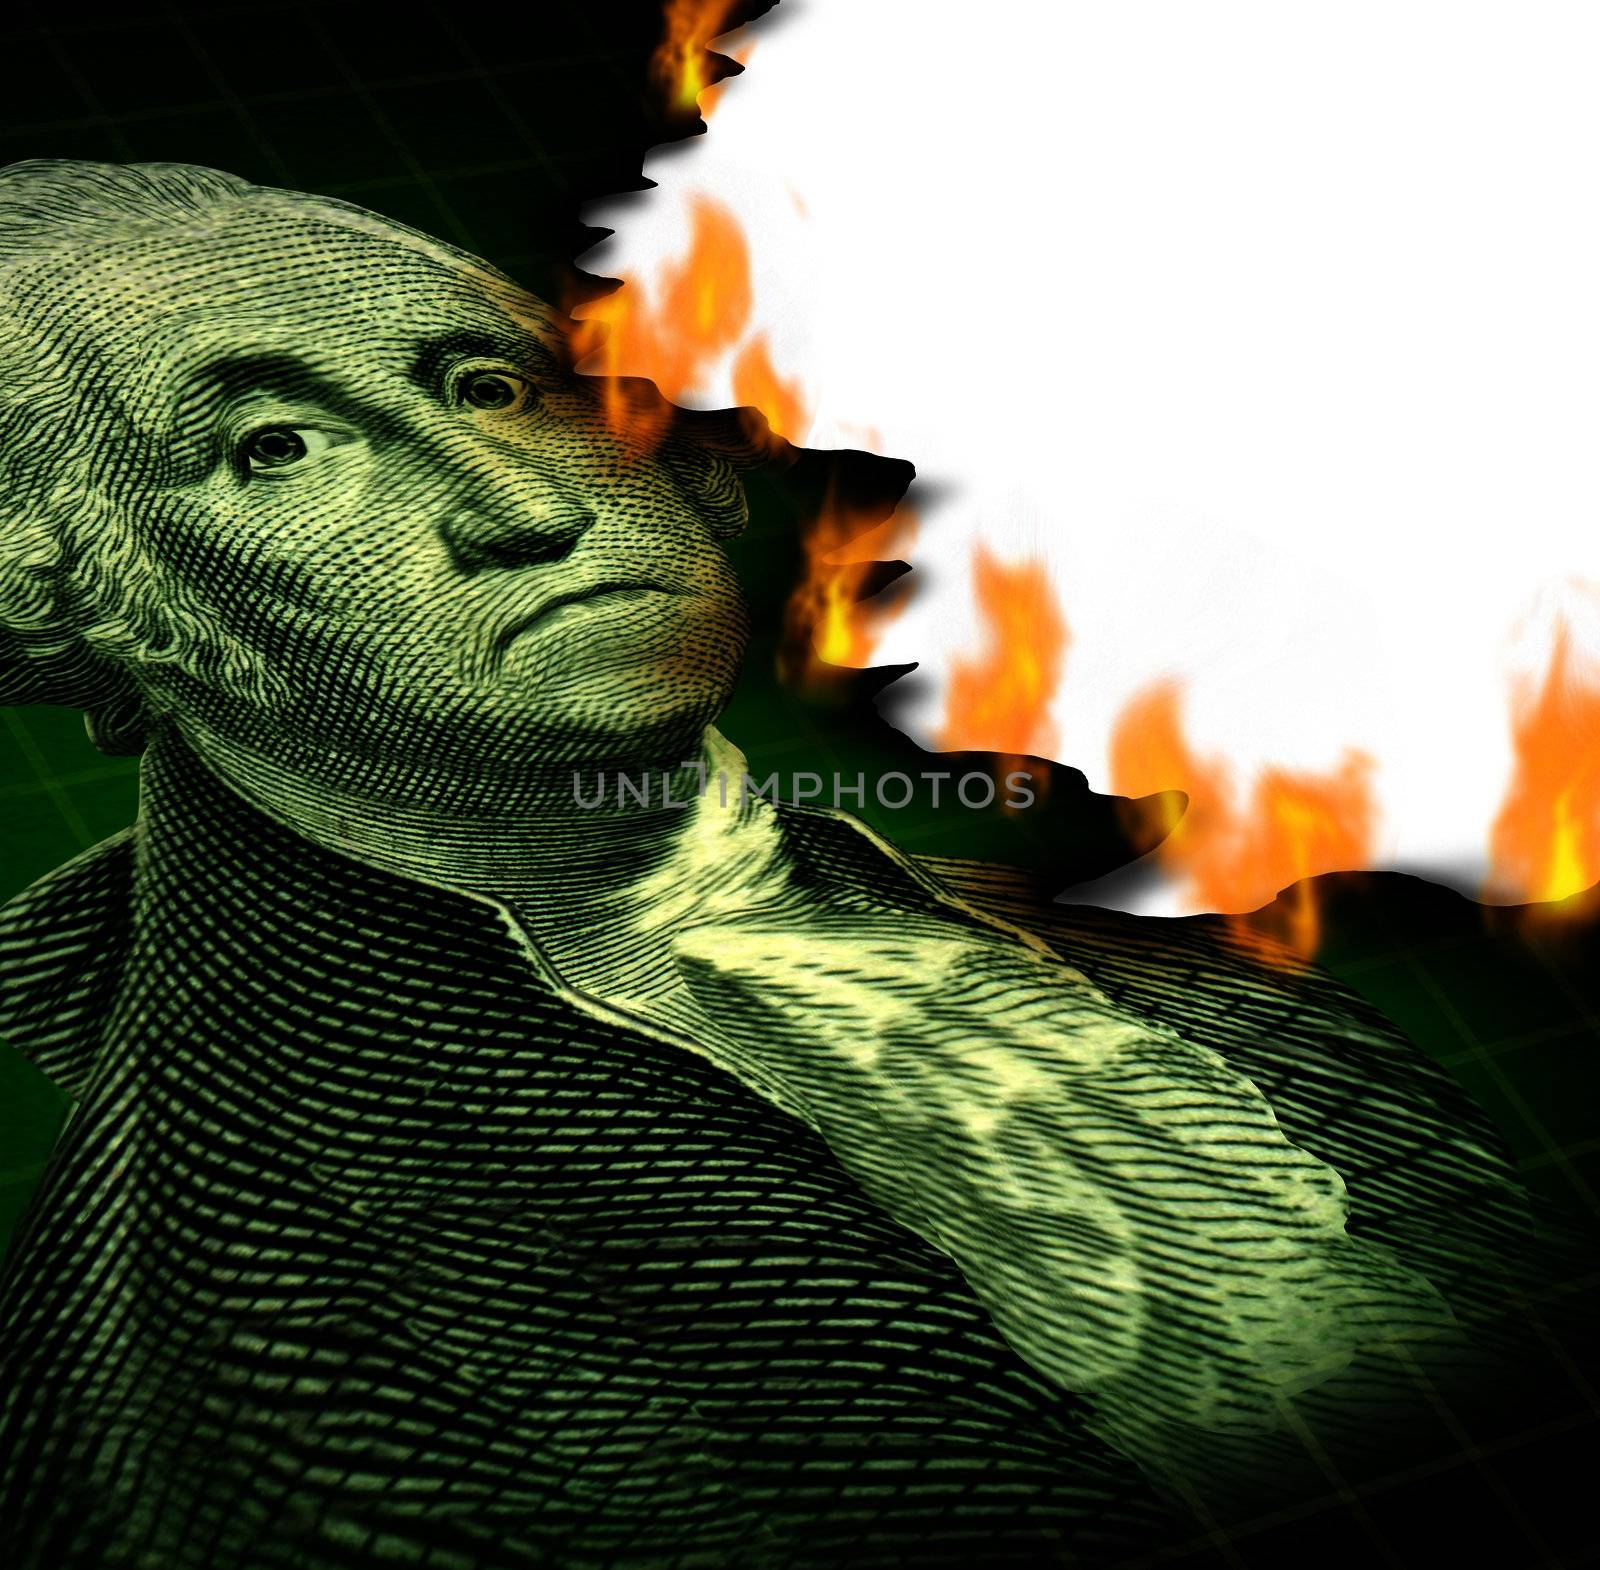 Losing your investment and financial debt crisis concept with a paper currency icon of George Washington and flames burning the paper as a symbol of declining wealth and finance despair.